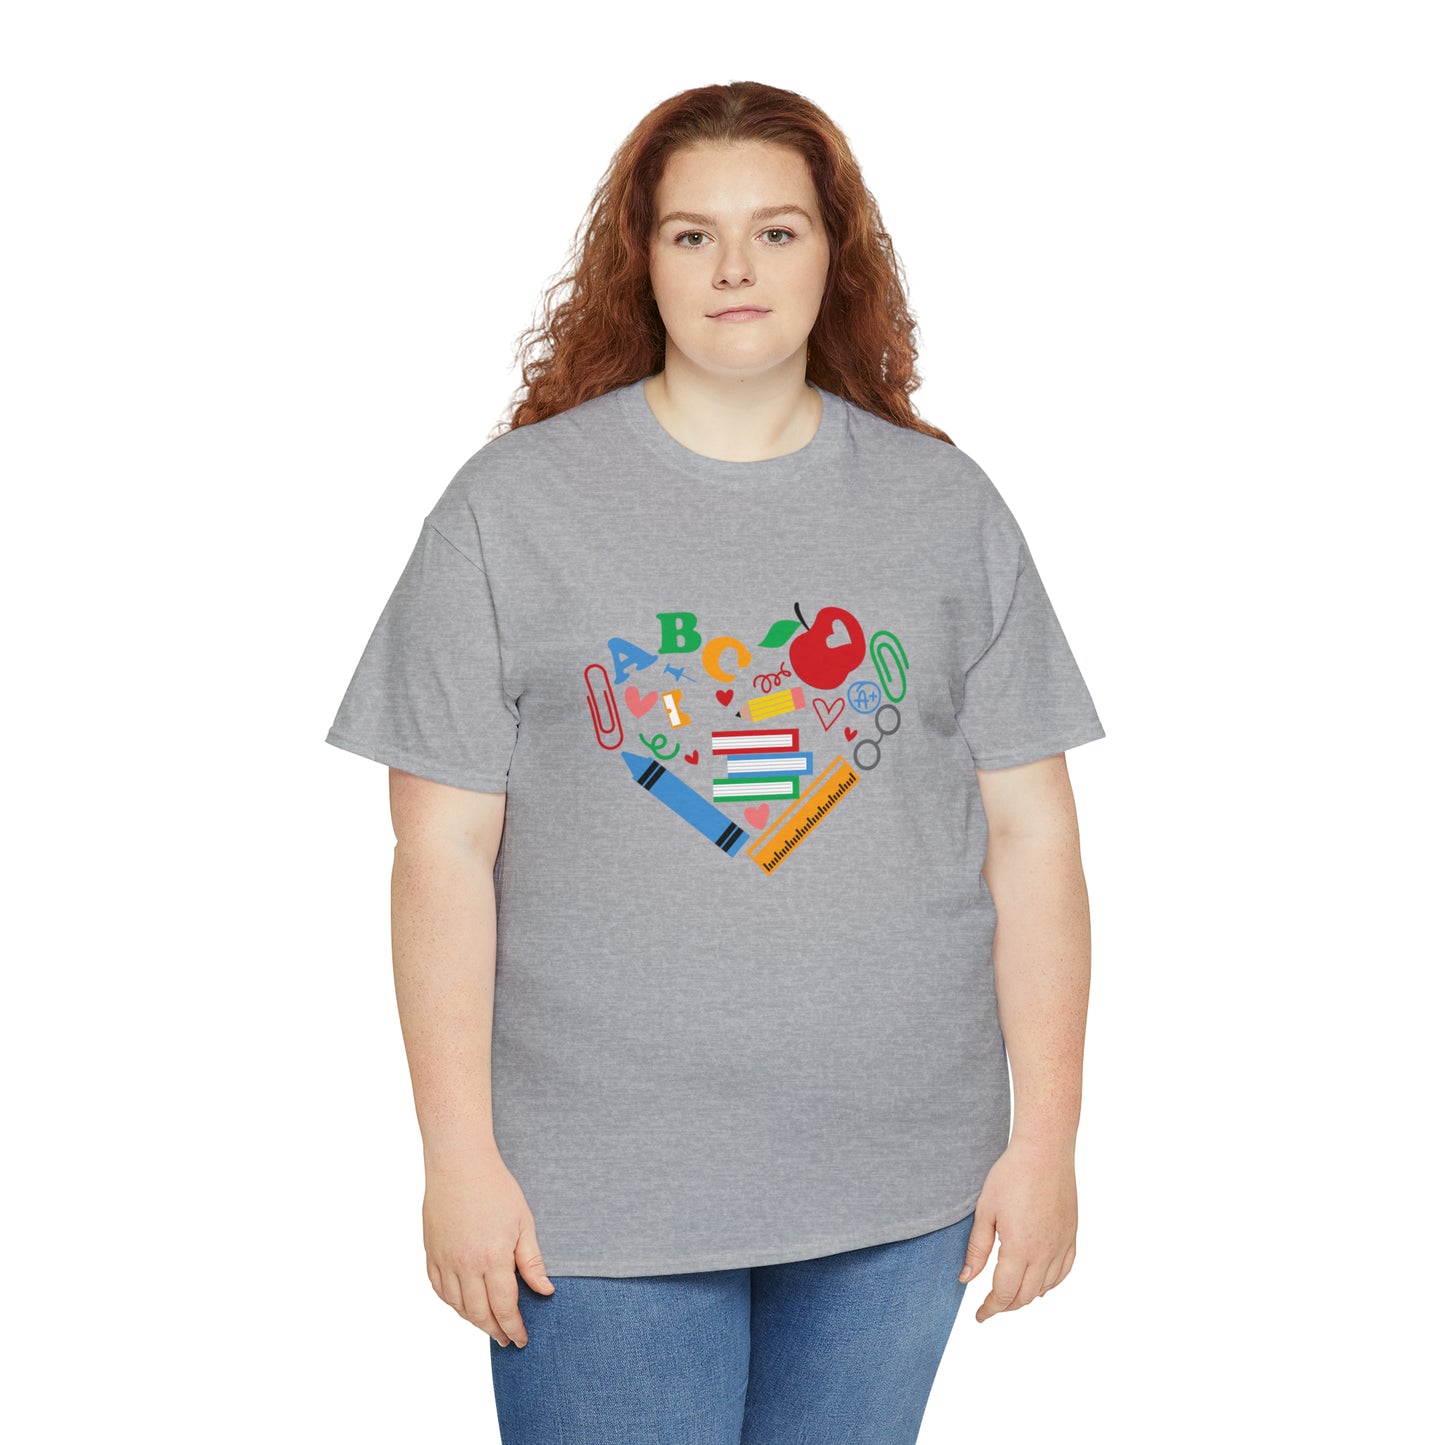 Mock up of a plus-size woman wearing the Sport Grey shirt